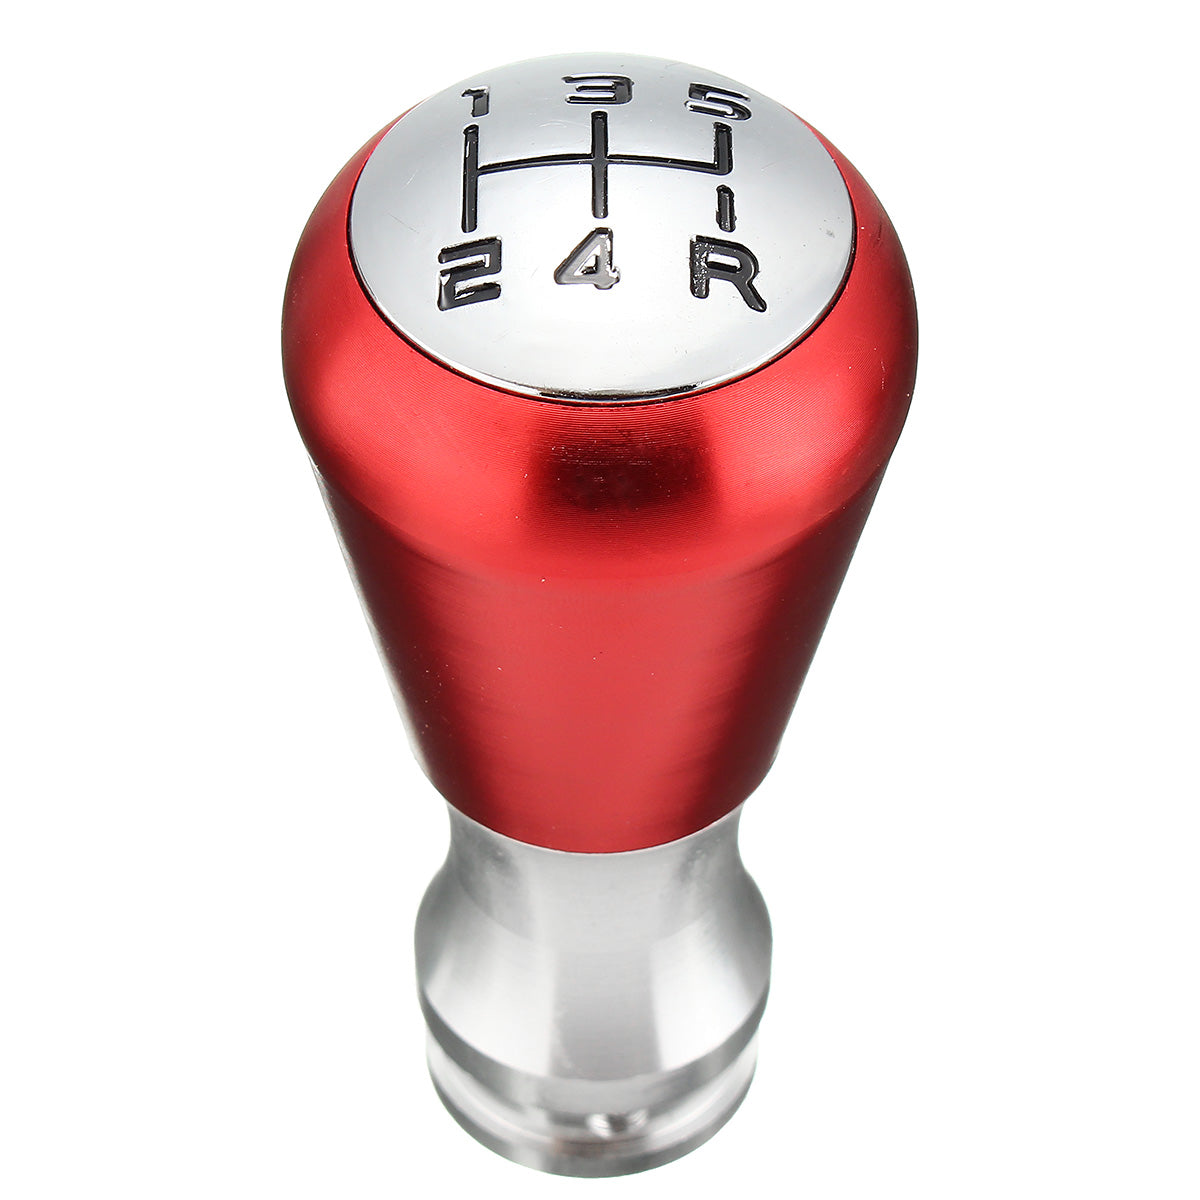 Maroon 5 Speed Manual Gear Shift Knob Aluminum Alloy Black/Blue/Red with Adapter For Peugeot 405 307 206